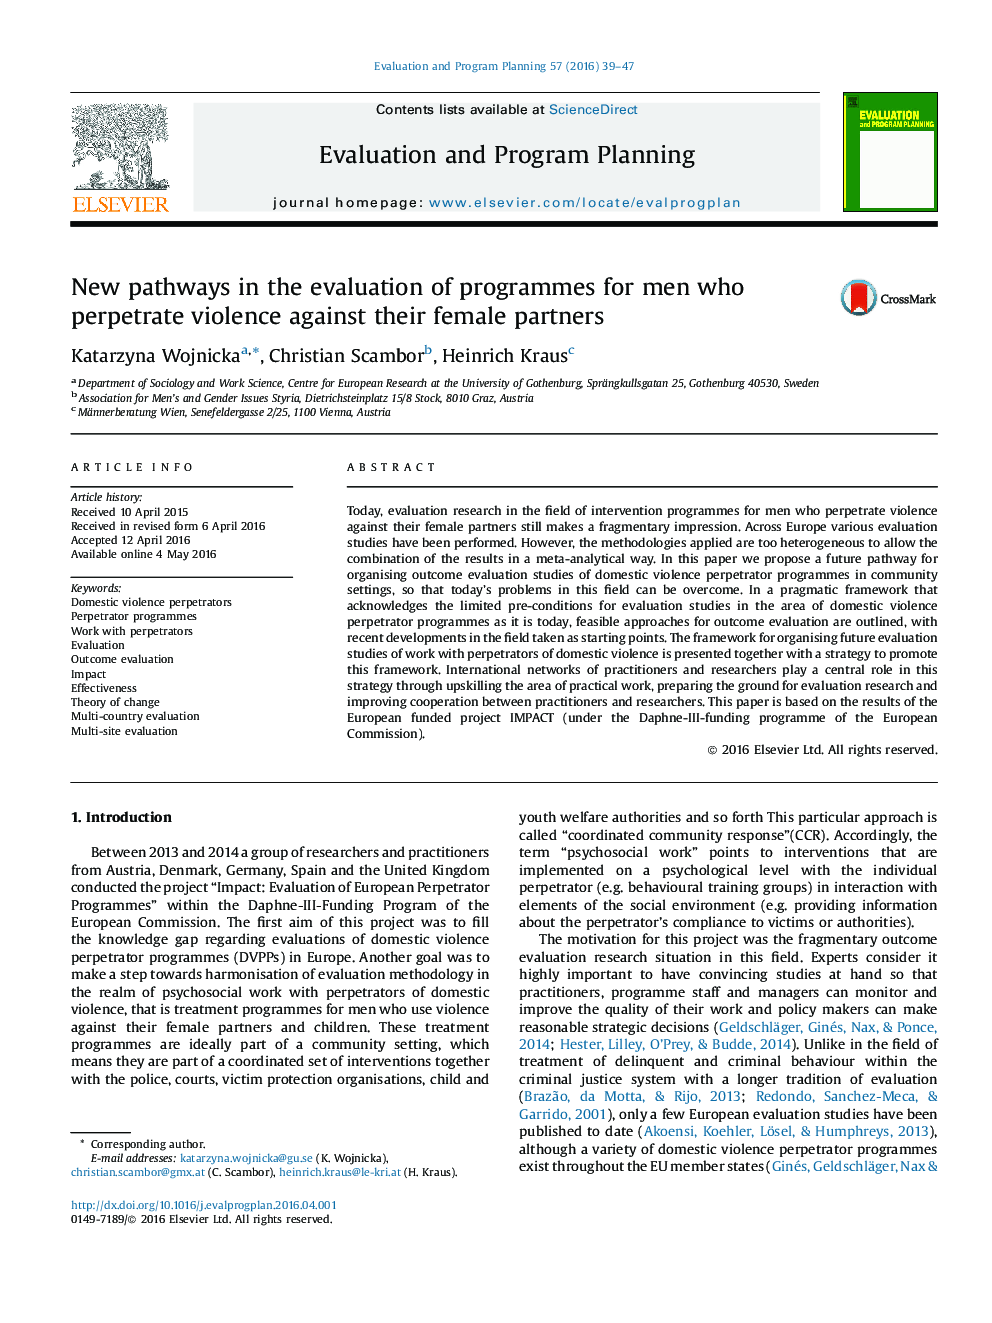 New pathways in the evaluation of programmes for men who perpetrate violence against their female partners